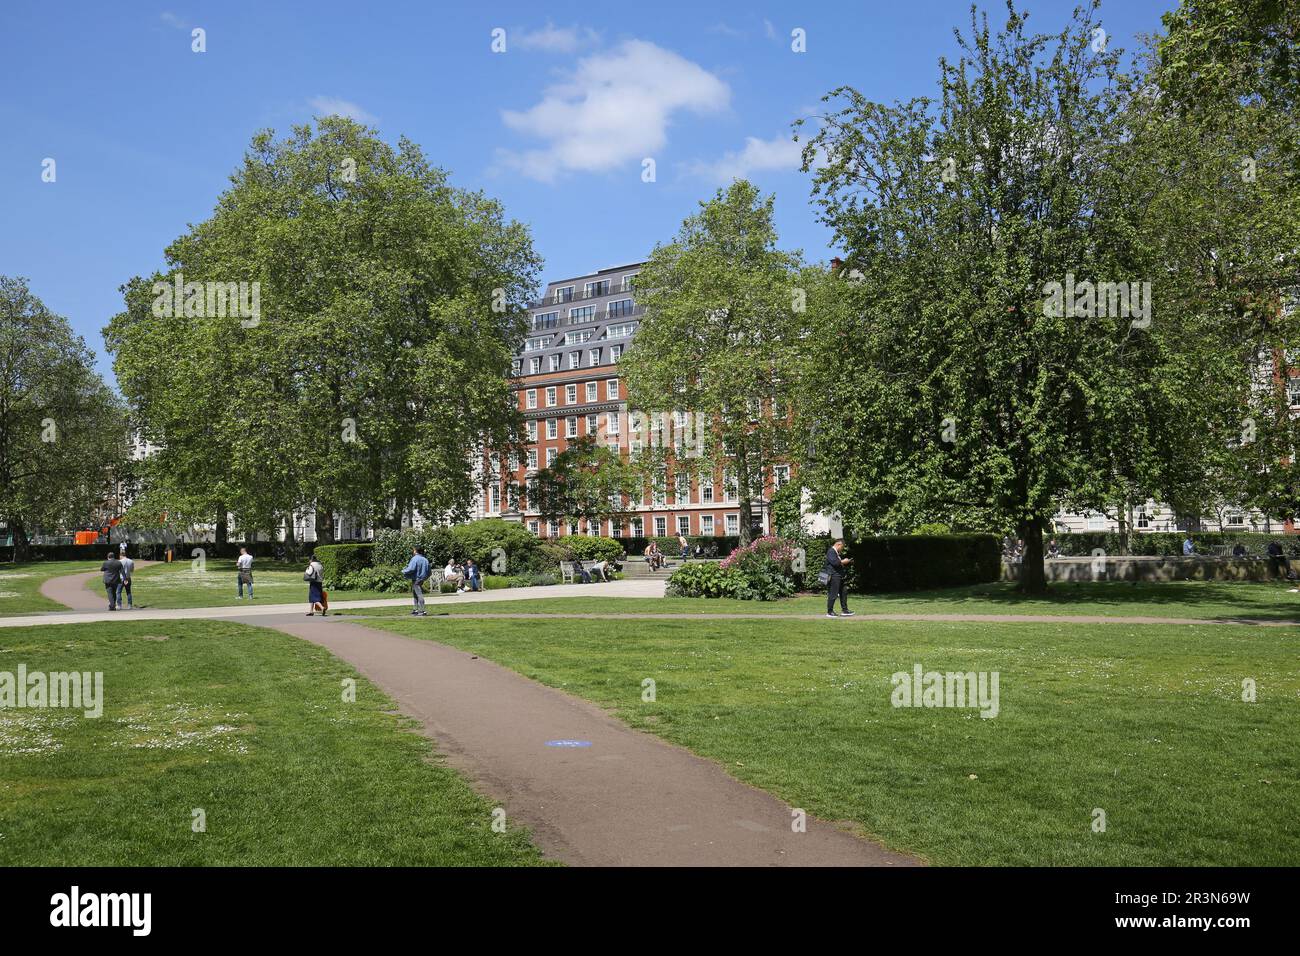 Grosvenor Square, Mayfair, London, UK. People enjoy sunny, summer weather in the central gardens. Stock Photo